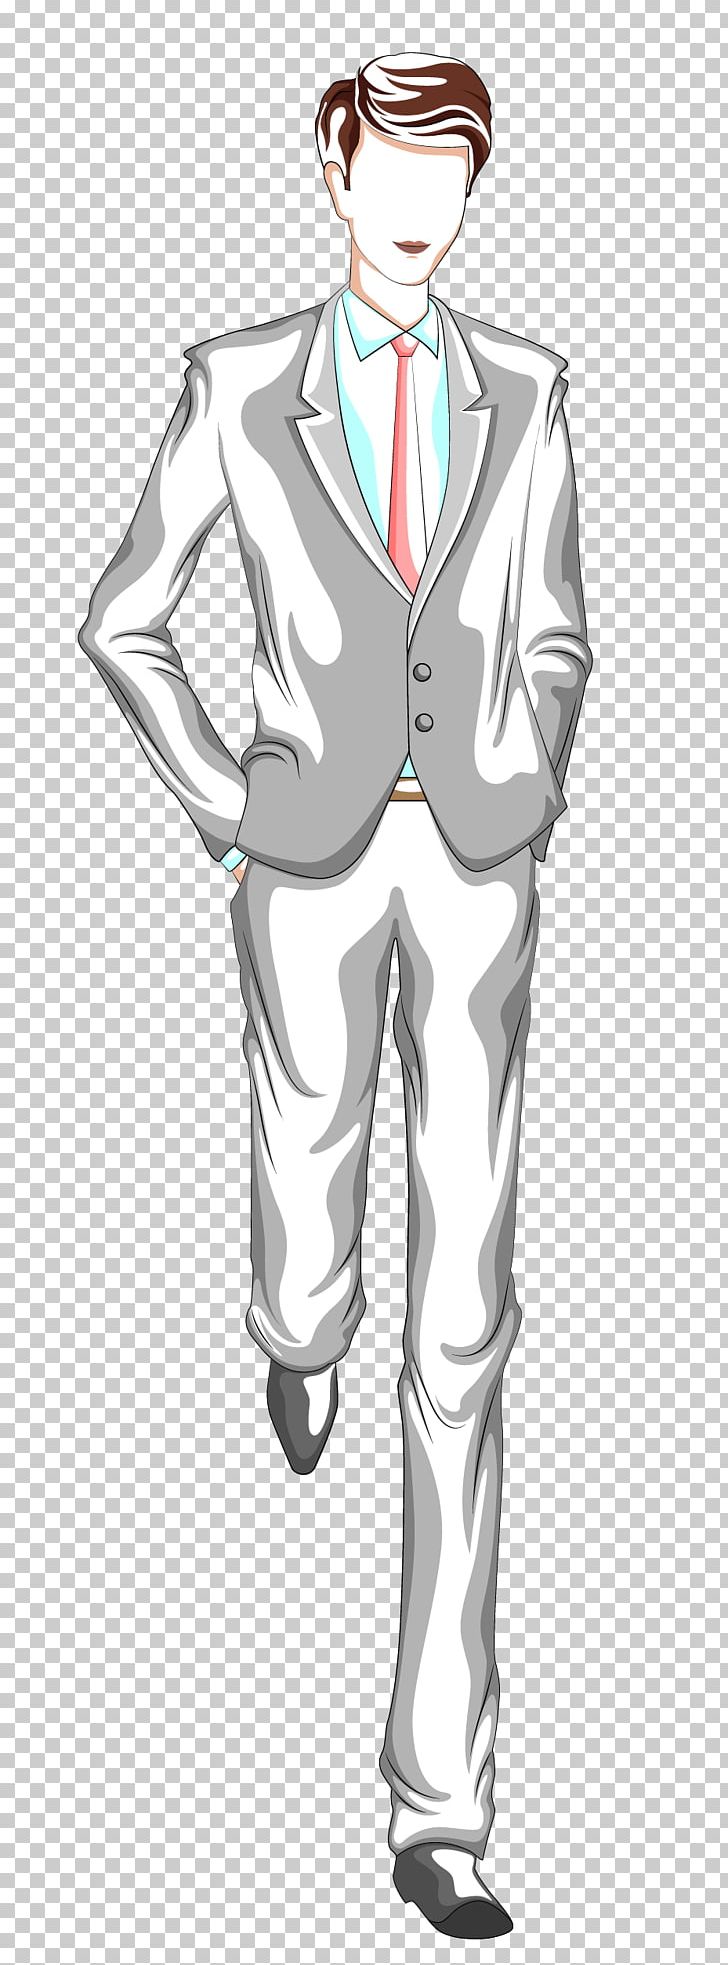 Wedding Marriage Illustration PNG, Clipart, Bride, Business Man, Cartoon, Couple, Fashion Design Free PNG Download